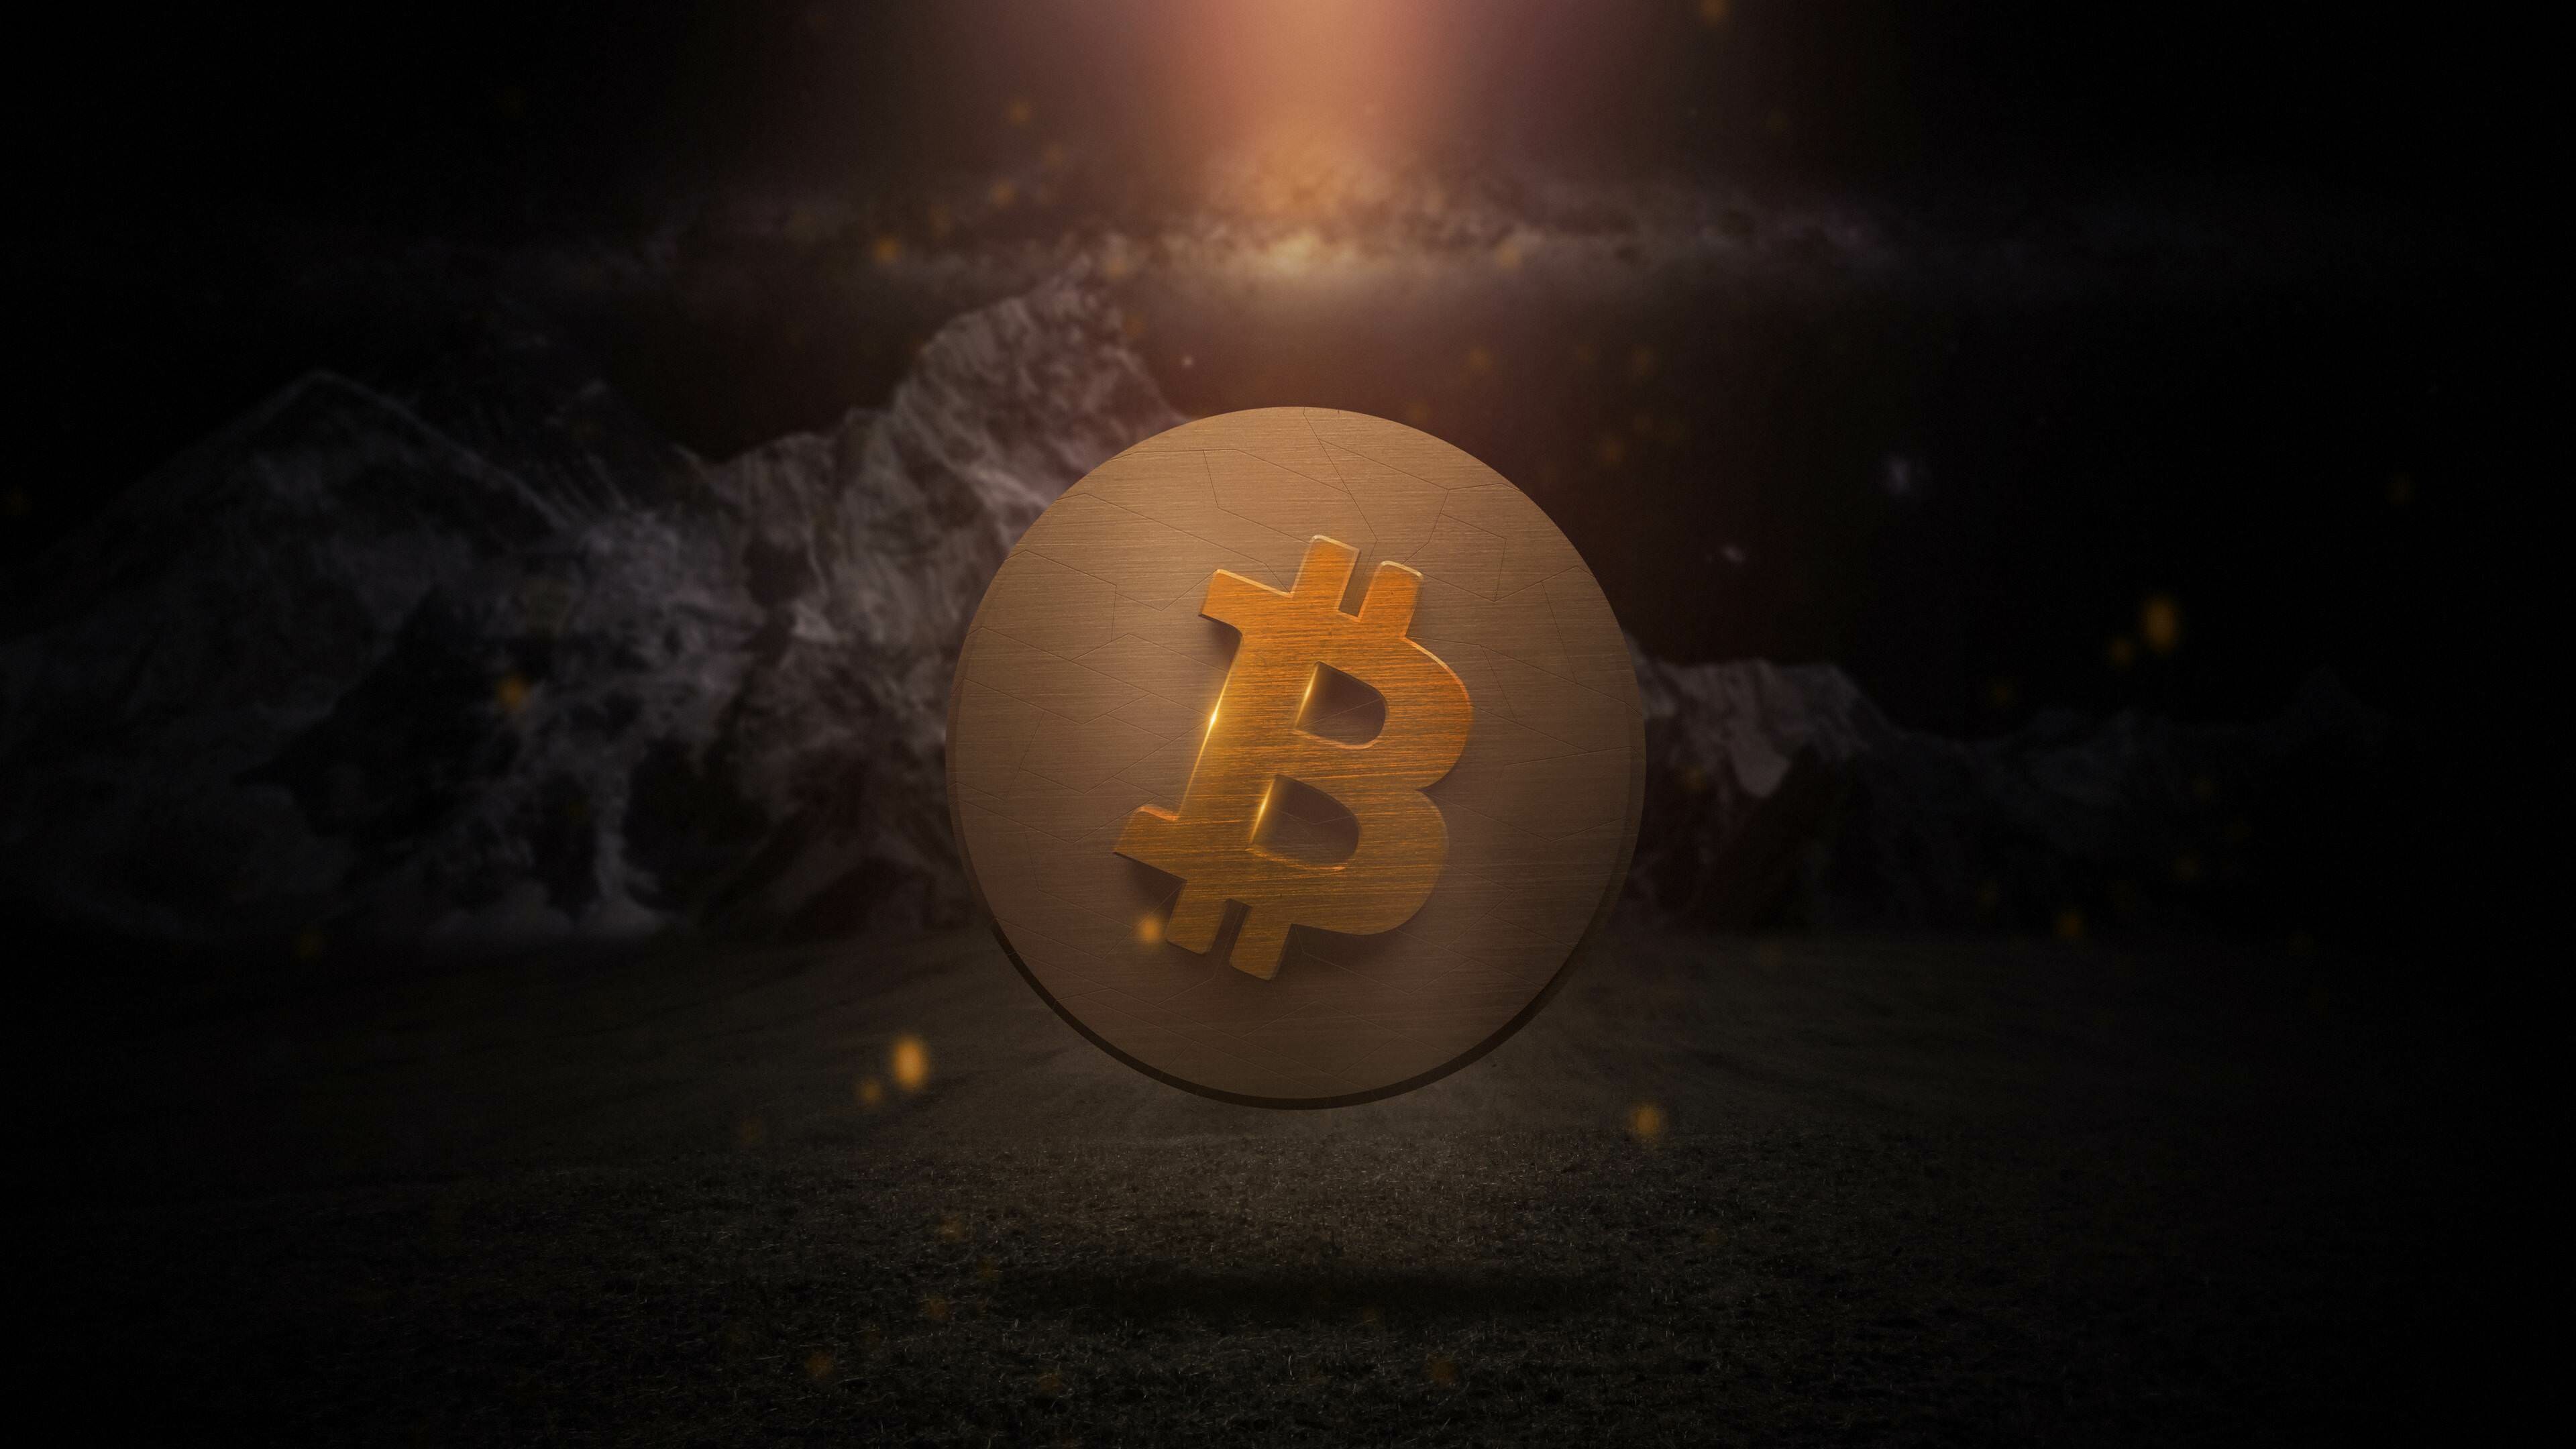 Bitcoin: A form of digital currency that aims to eliminate the need for central authorities such as banks or governments. 3840x2160 4K Wallpaper.